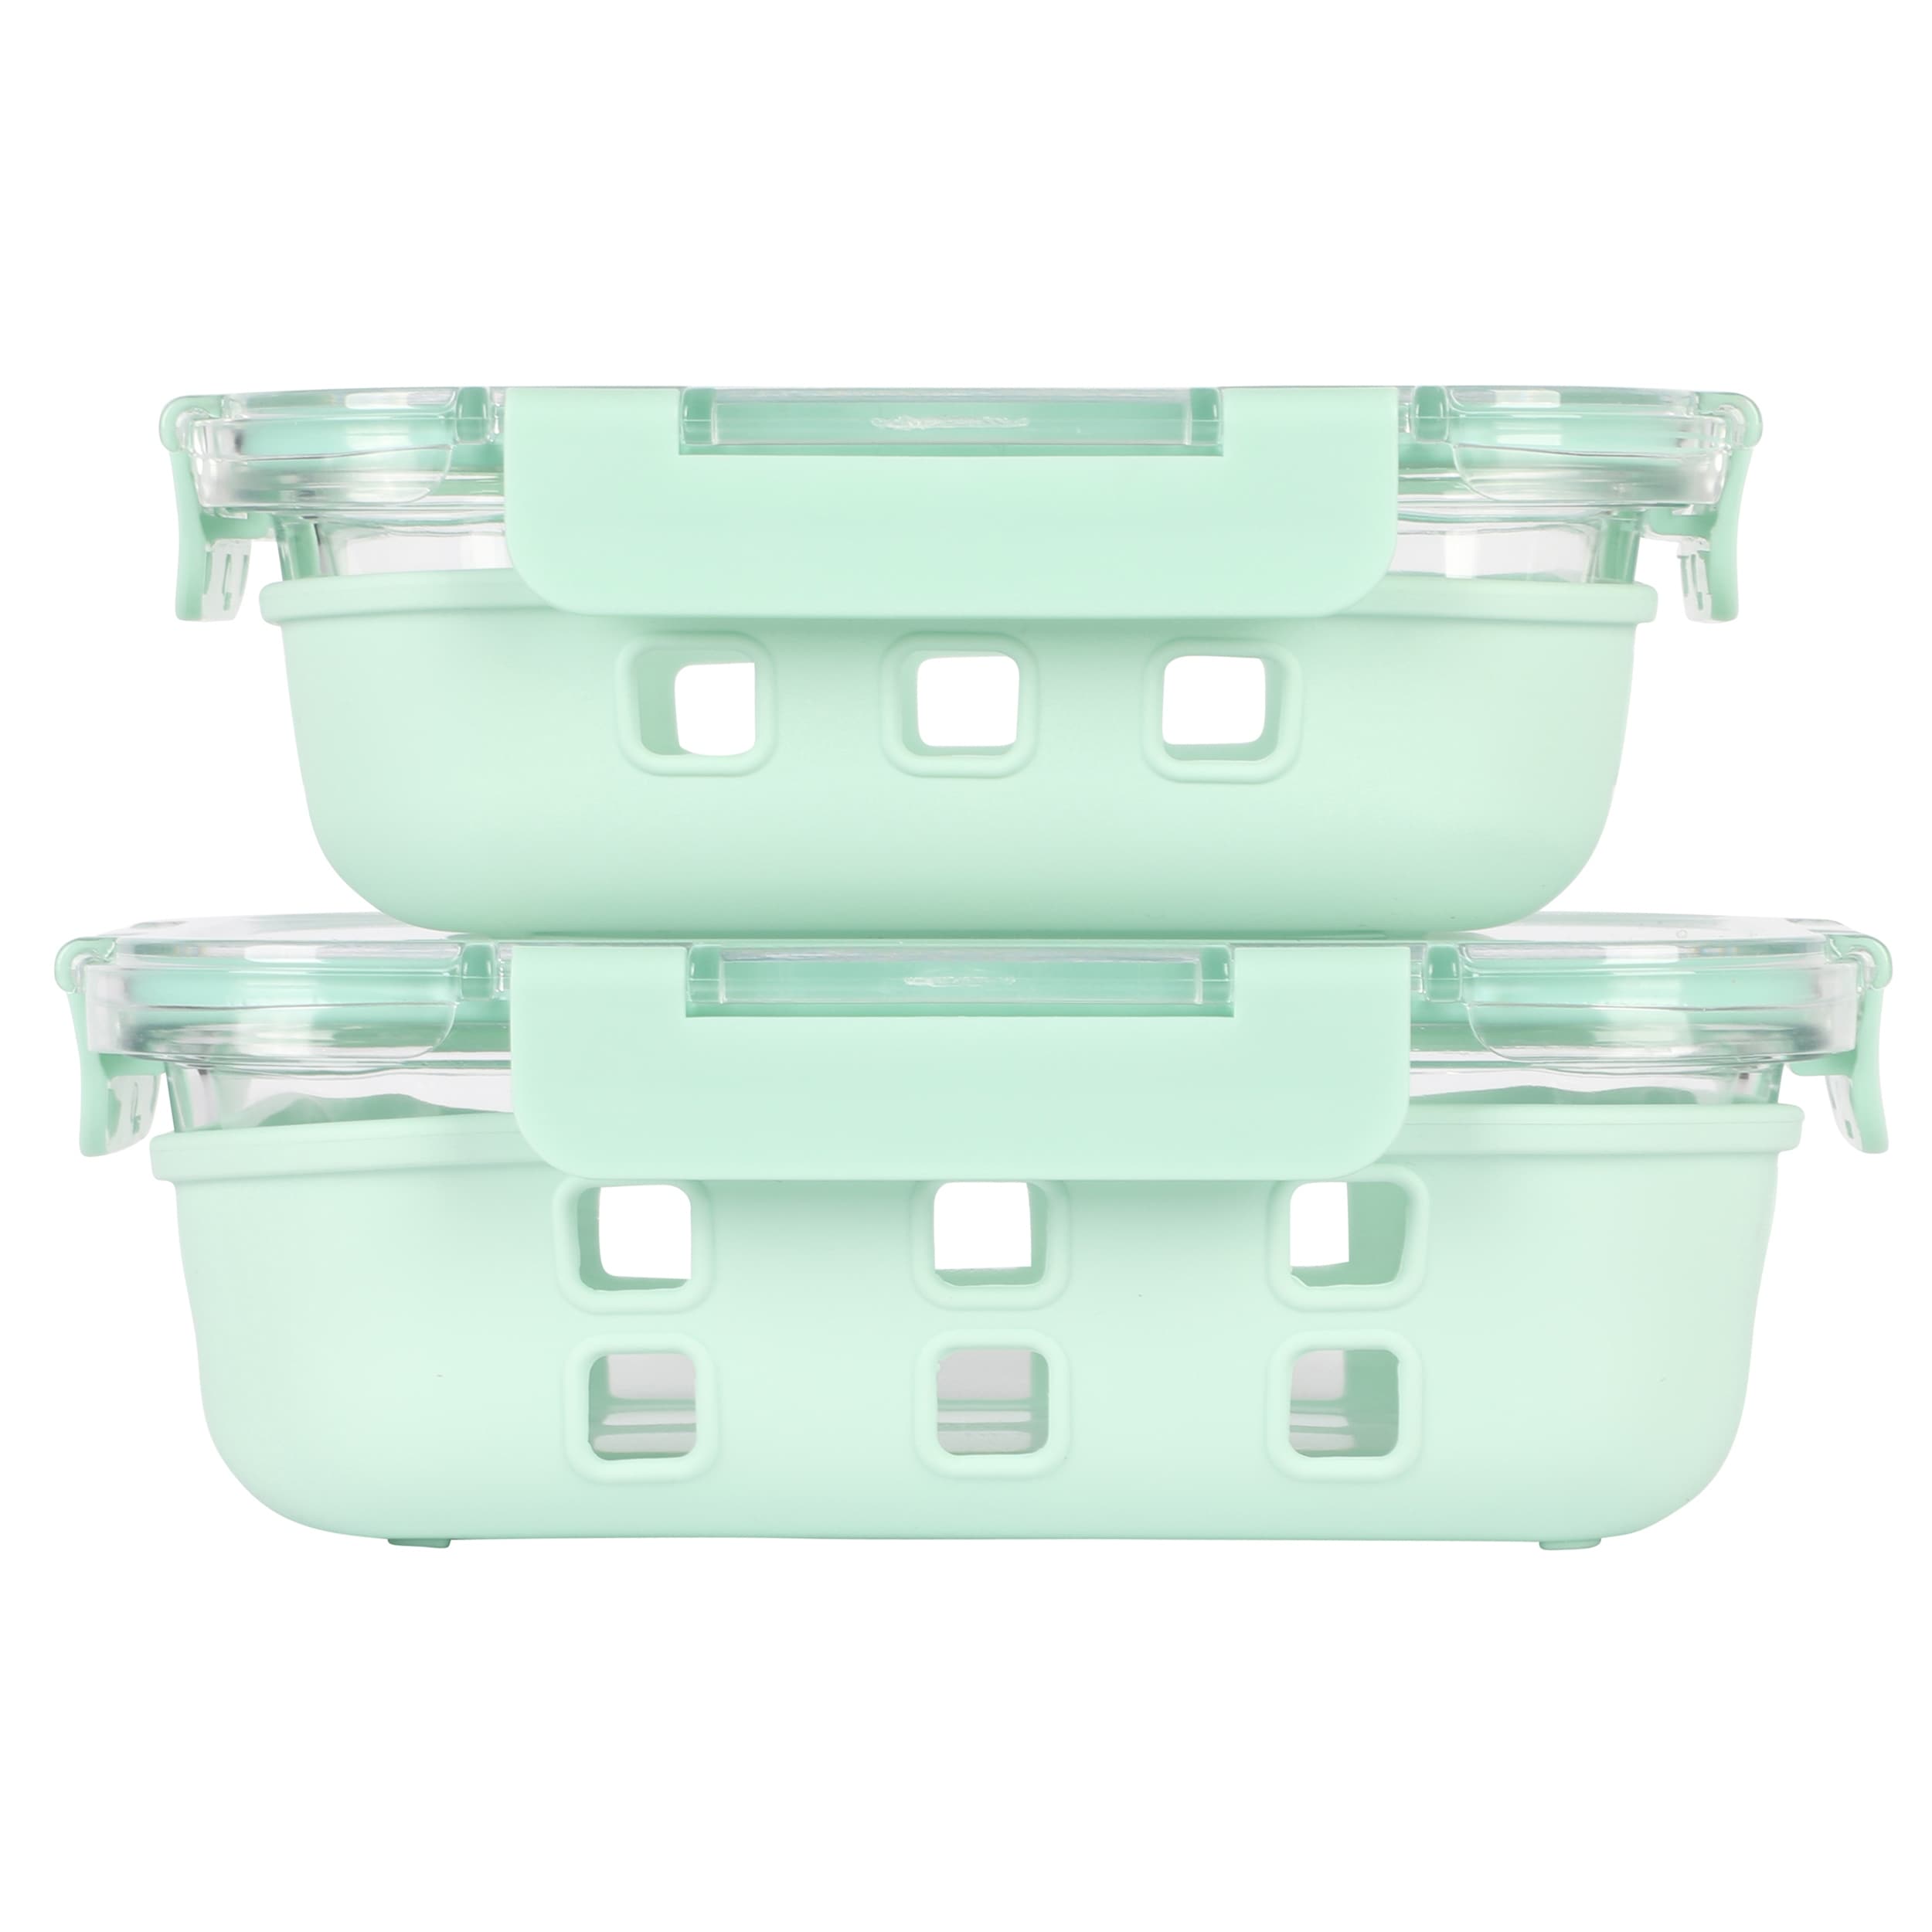 https://ak1.ostkcdn.com/images/products/is/images/direct/c1b85fe1cc013139e3139375afeef75ebcc4d028/2-Piece-Glass-Container-Set-with-Snap-Lids.jpg